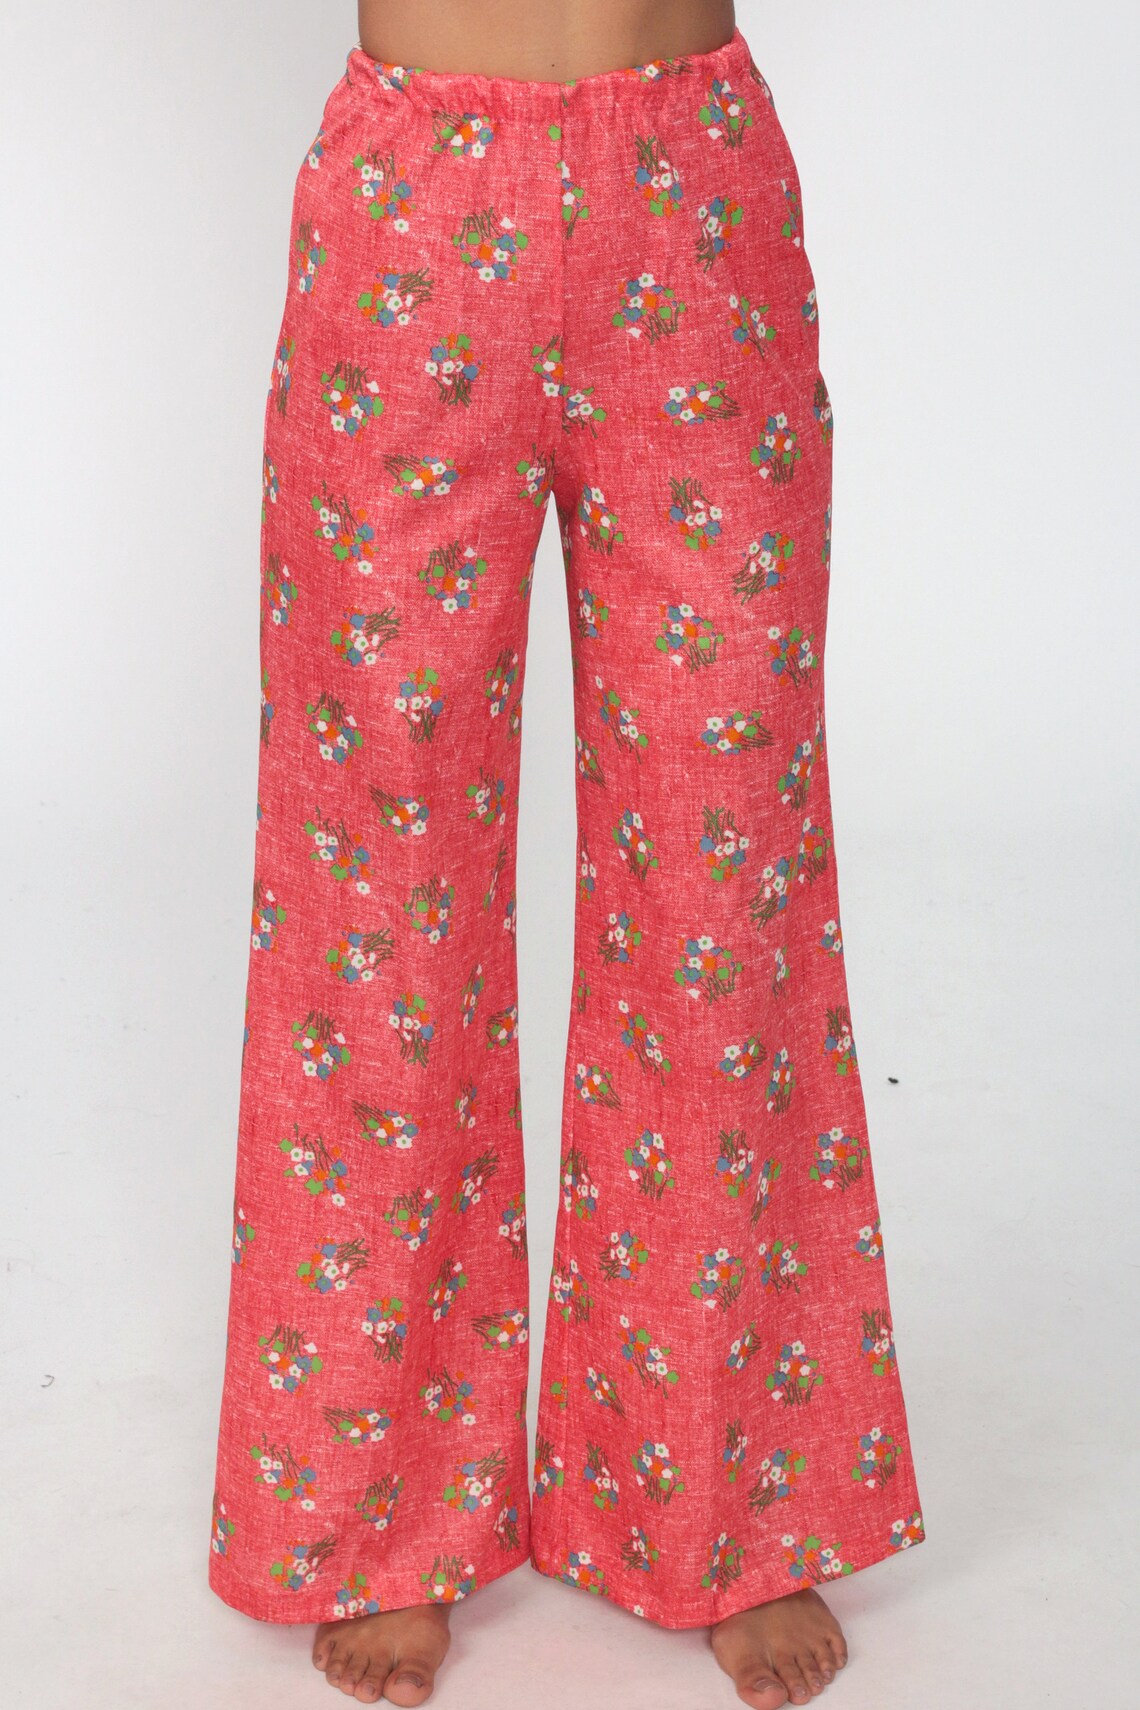 Floral Bell Bottom Pants Red Polyester Pants Bohemian 70s | Etsy